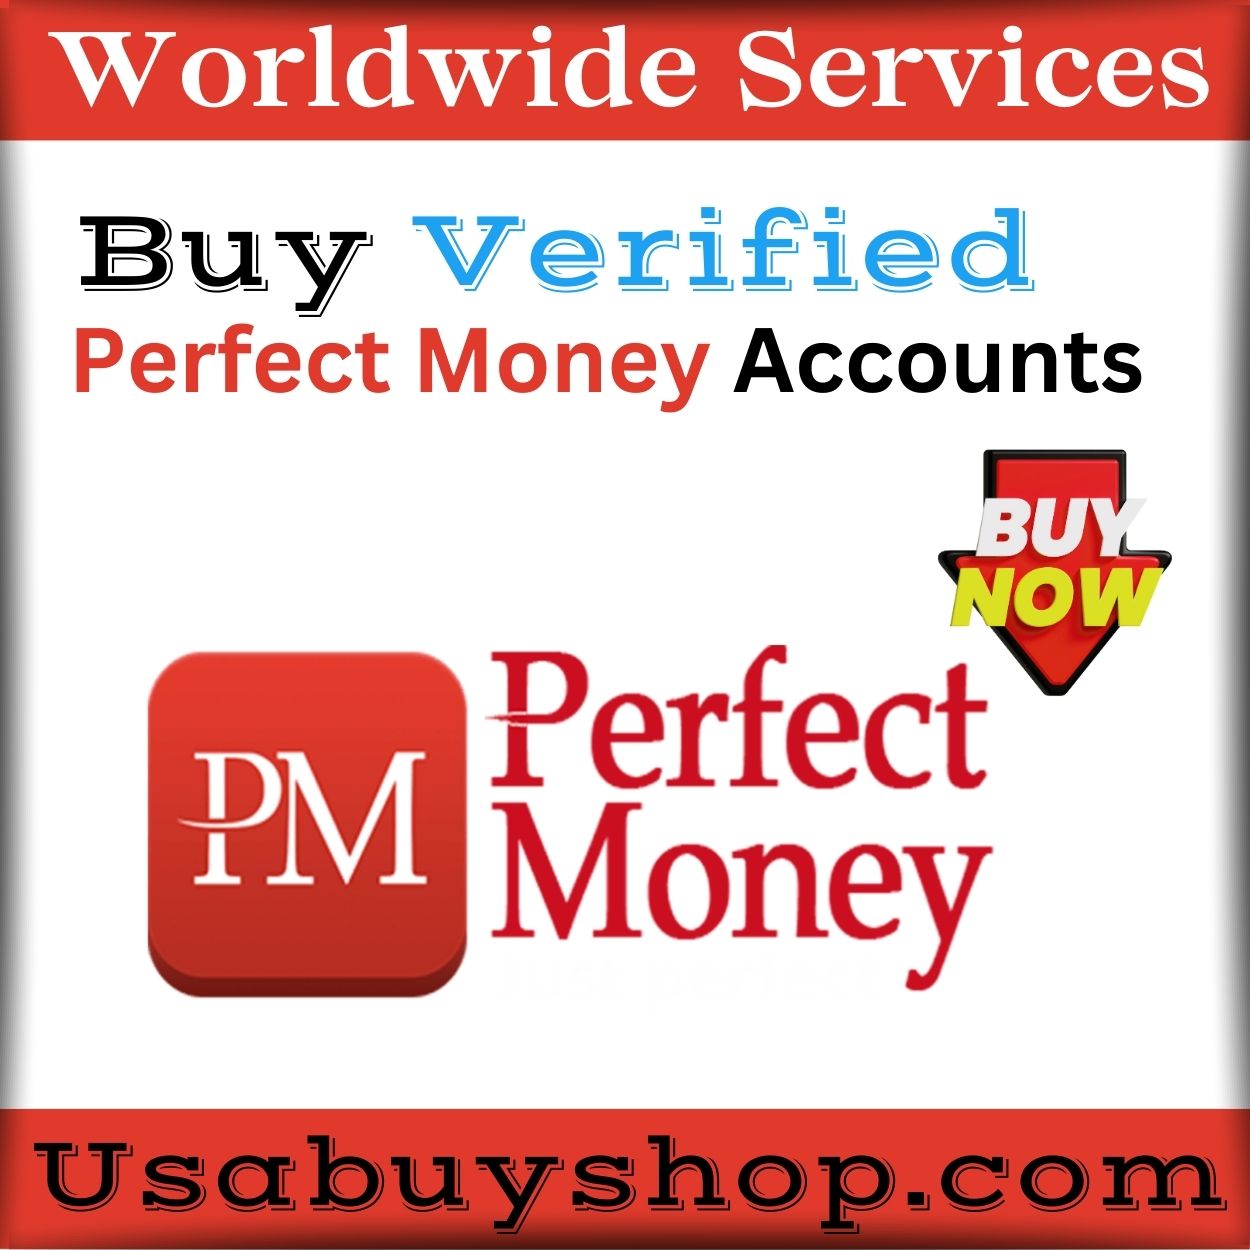 Buy Verified Perfect Money Accounts - 100% Safe Transactions